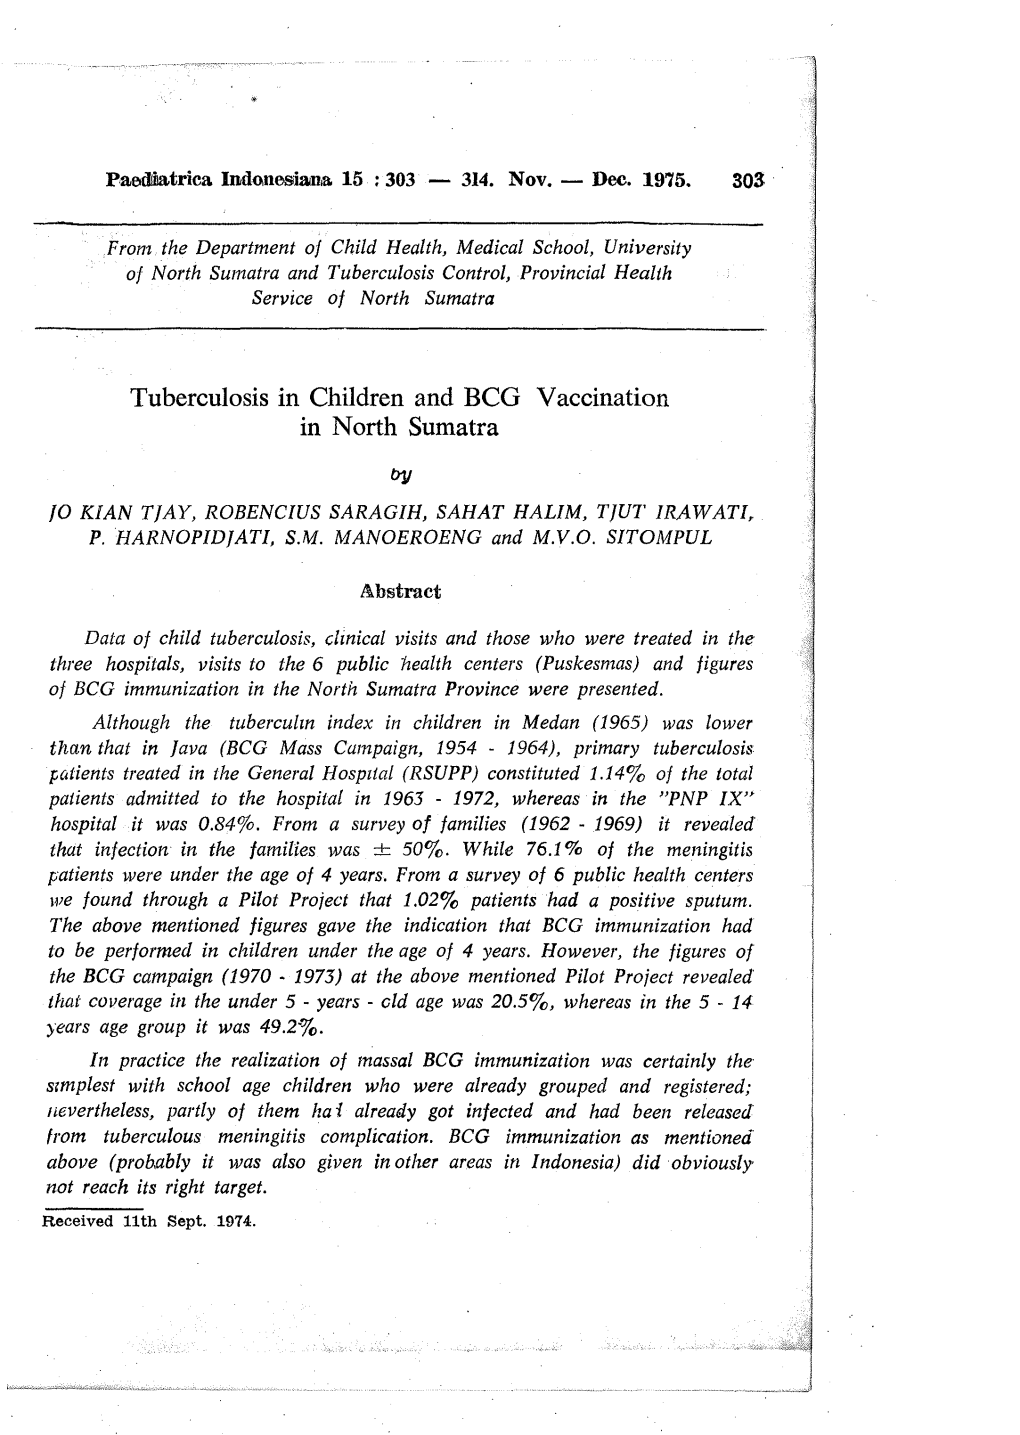 Tuberculosis in Children and BCG Vaccination in North Sumatra